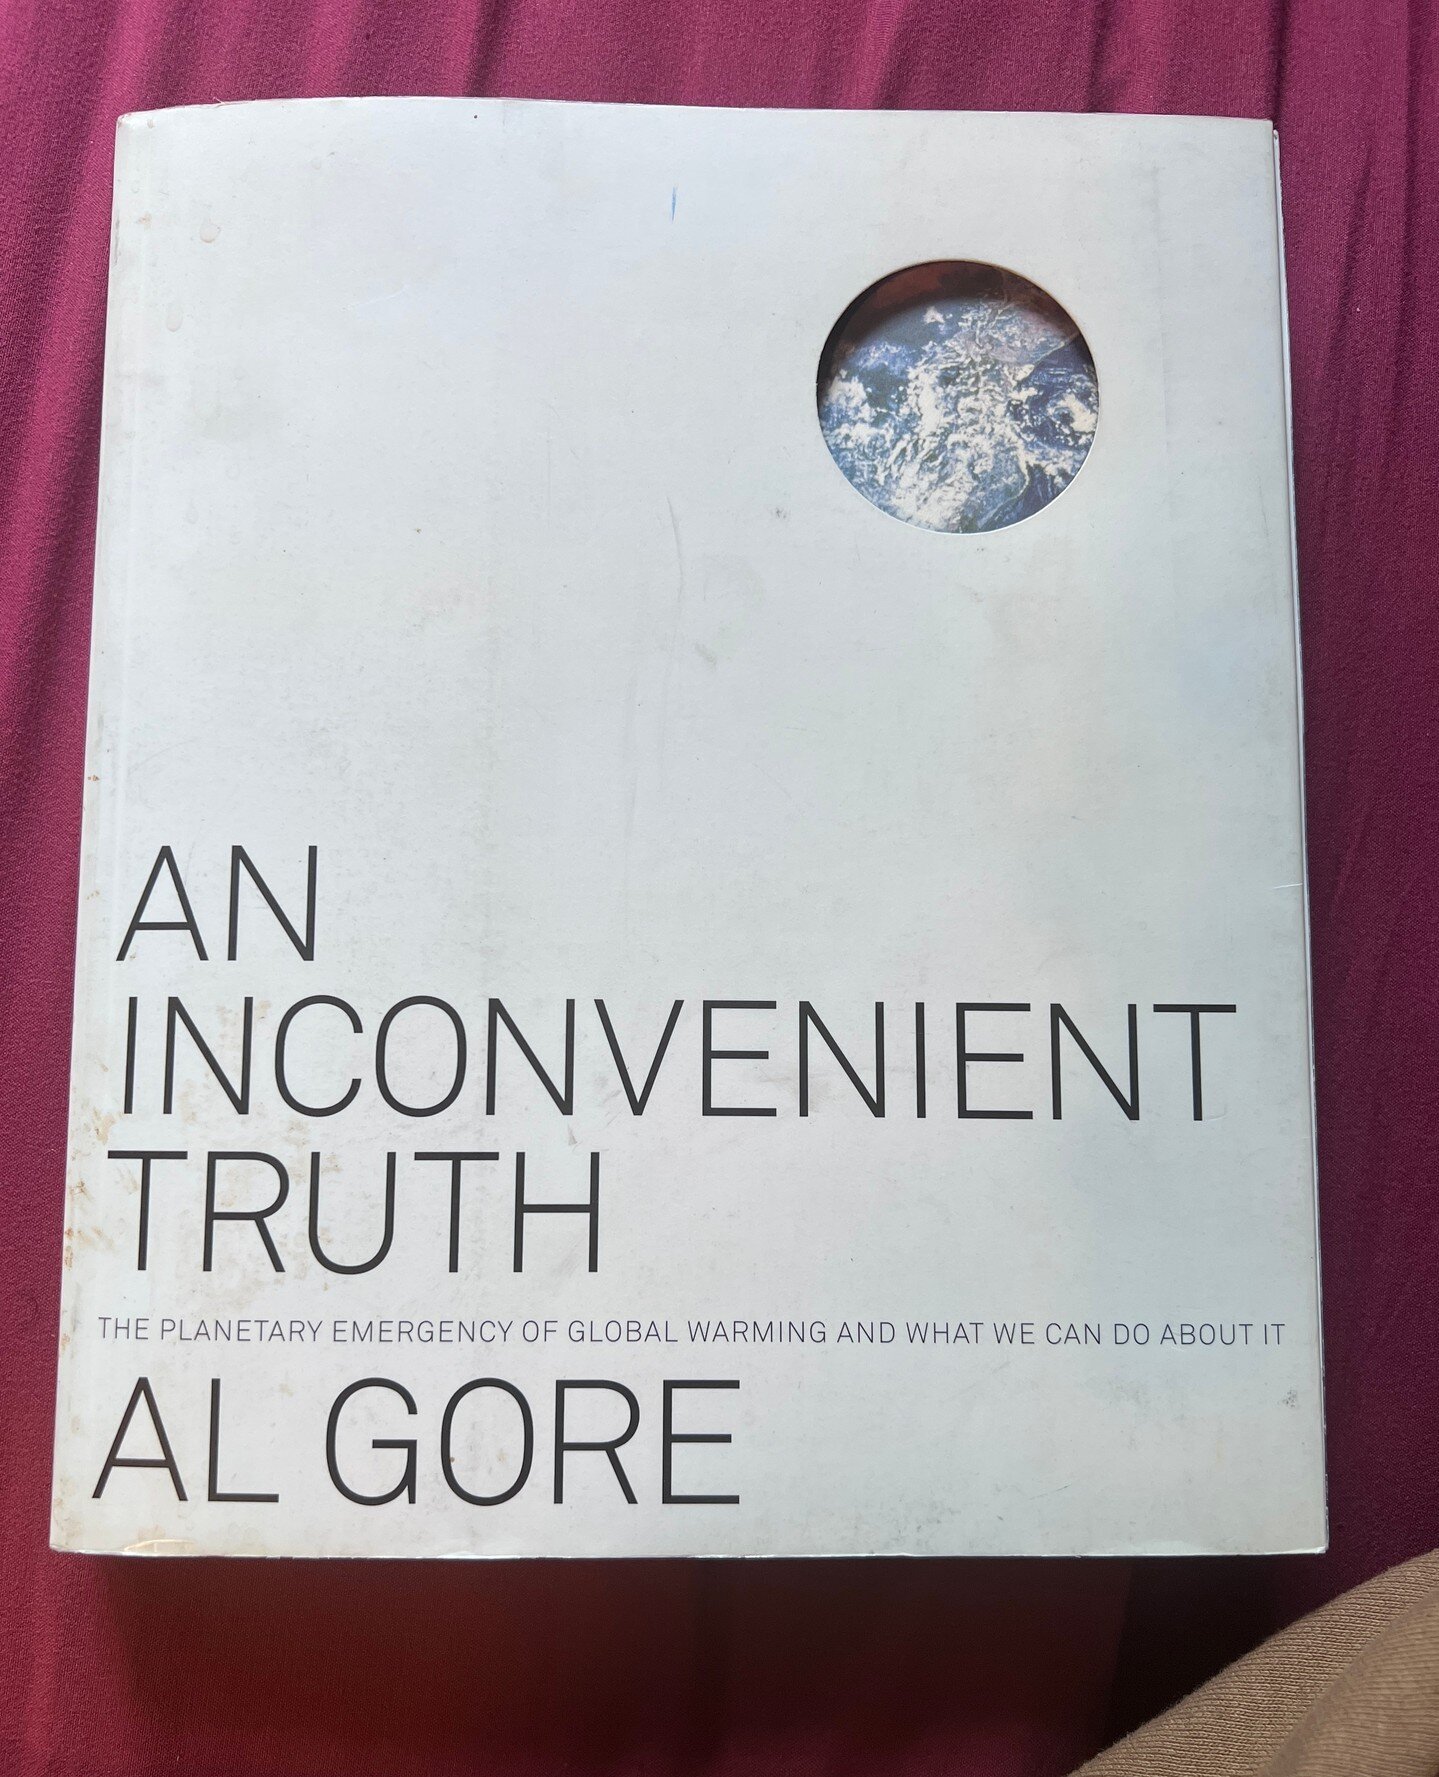 Some heat from our resident sustainability girlie, @PolyamorousBlackGirl⁠
⁠
'An Inconvenient Truth' by Al Gore was the wake-up call we can't ignore. PBG constantly reminds us of the importance of protecting our planet and fighting climate change.⁠
⁠
